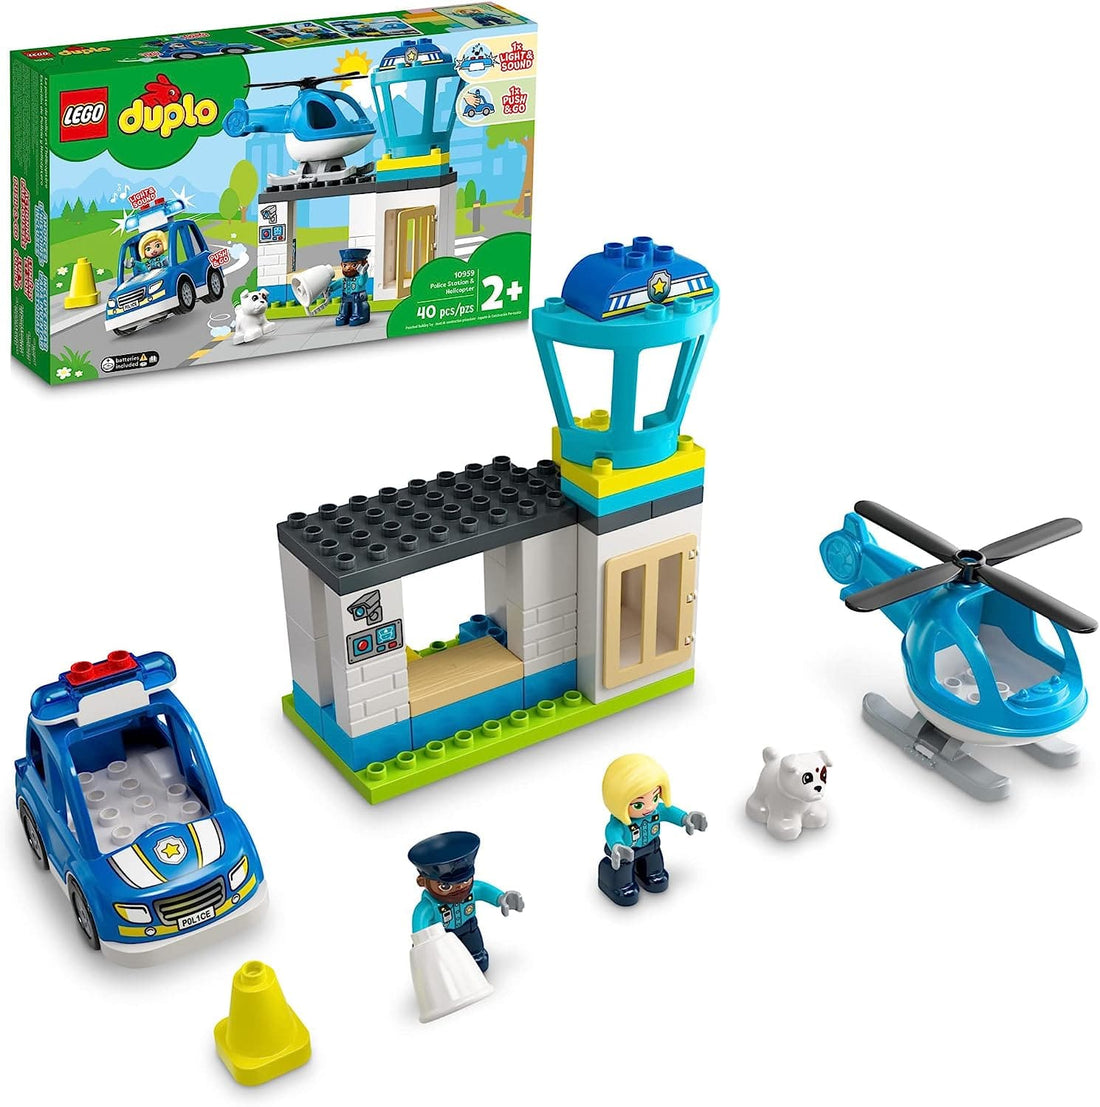 LEGO DUPLO Rescue Police Station - Push & Go Car Toy with Lights and Siren Plus Helicopter - best price from Maltashopper.com 10959